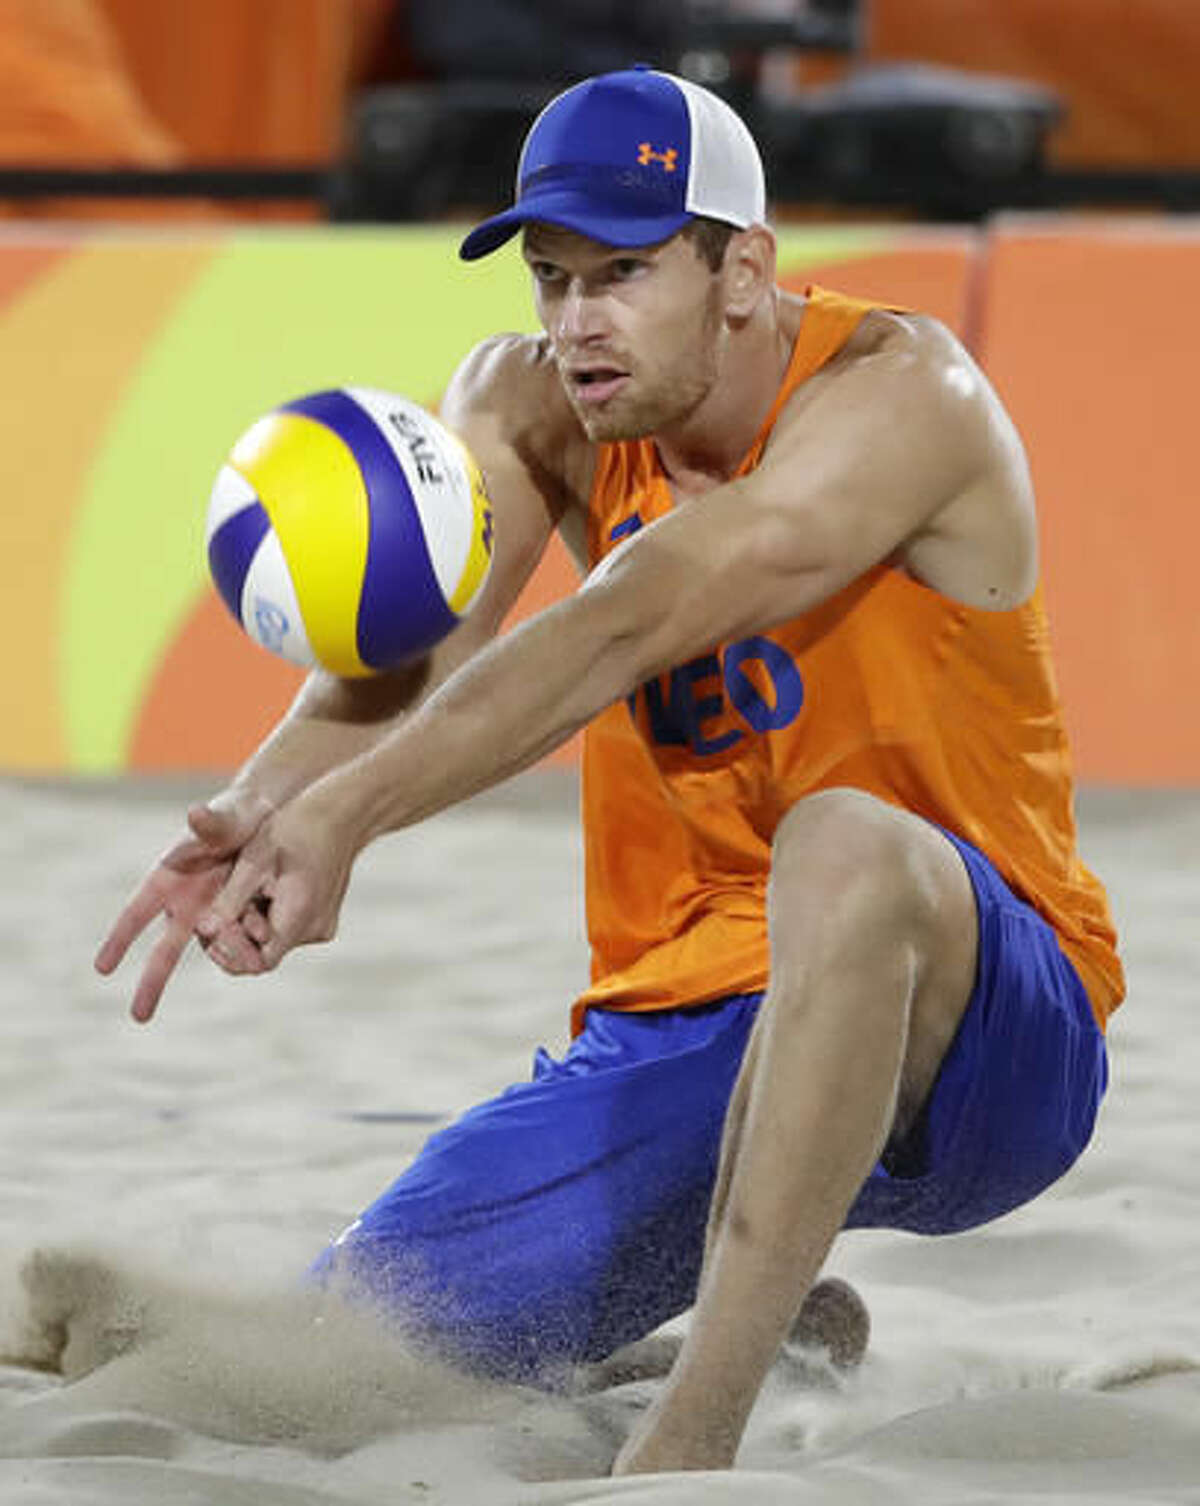 Netherland's Alexander Brouwer digs against Germany during a men's beach volleyball match at the 2016 Summer Olympics in Rio de Janeiro, Brazil, Monday, Aug. 8, 2016. (AP Photo/Marcio Jose Sanchez)